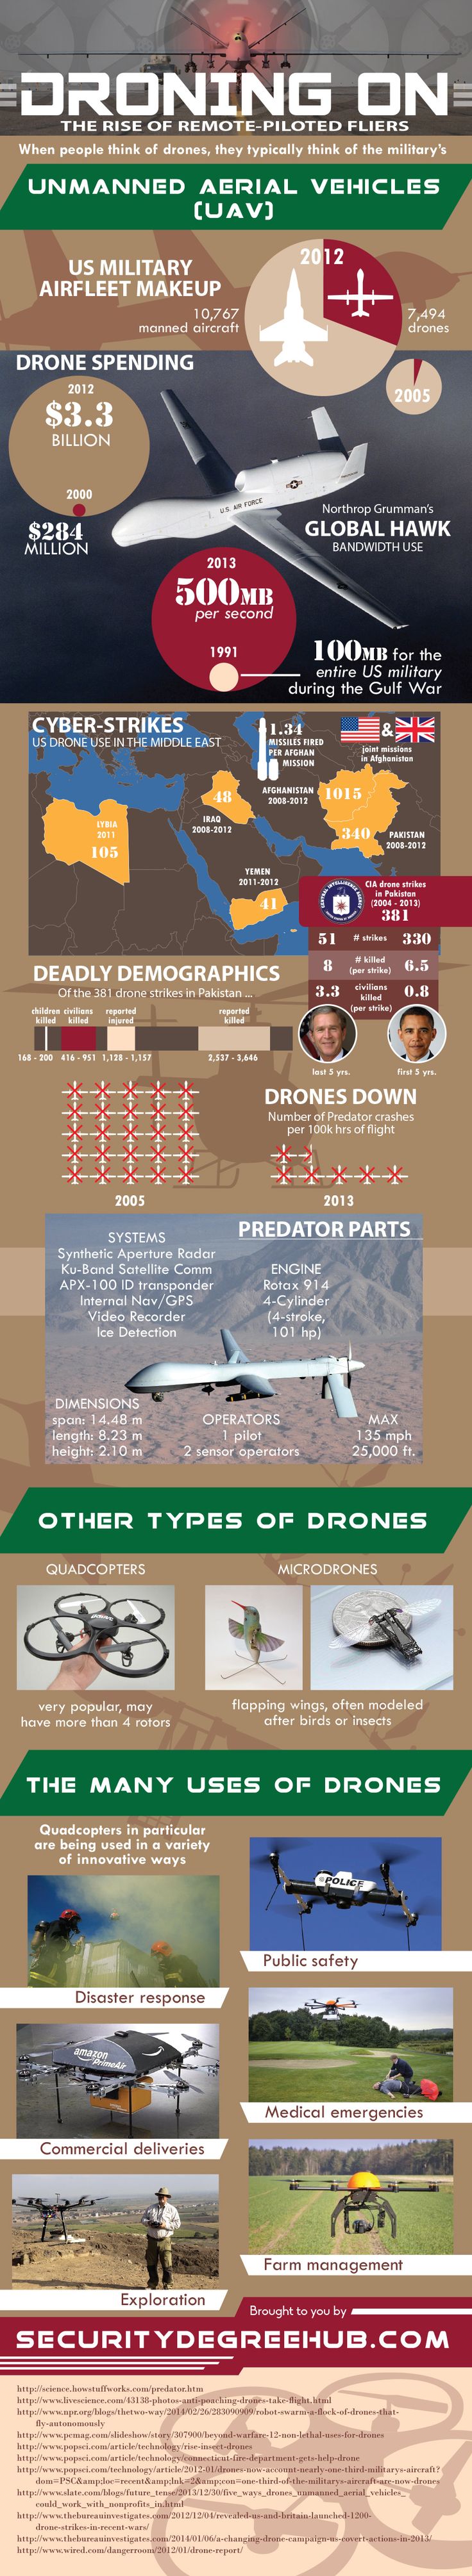 INFOGRAPHIC: Everything You Wanted to Know About Drones but Were Afraid to Googl...